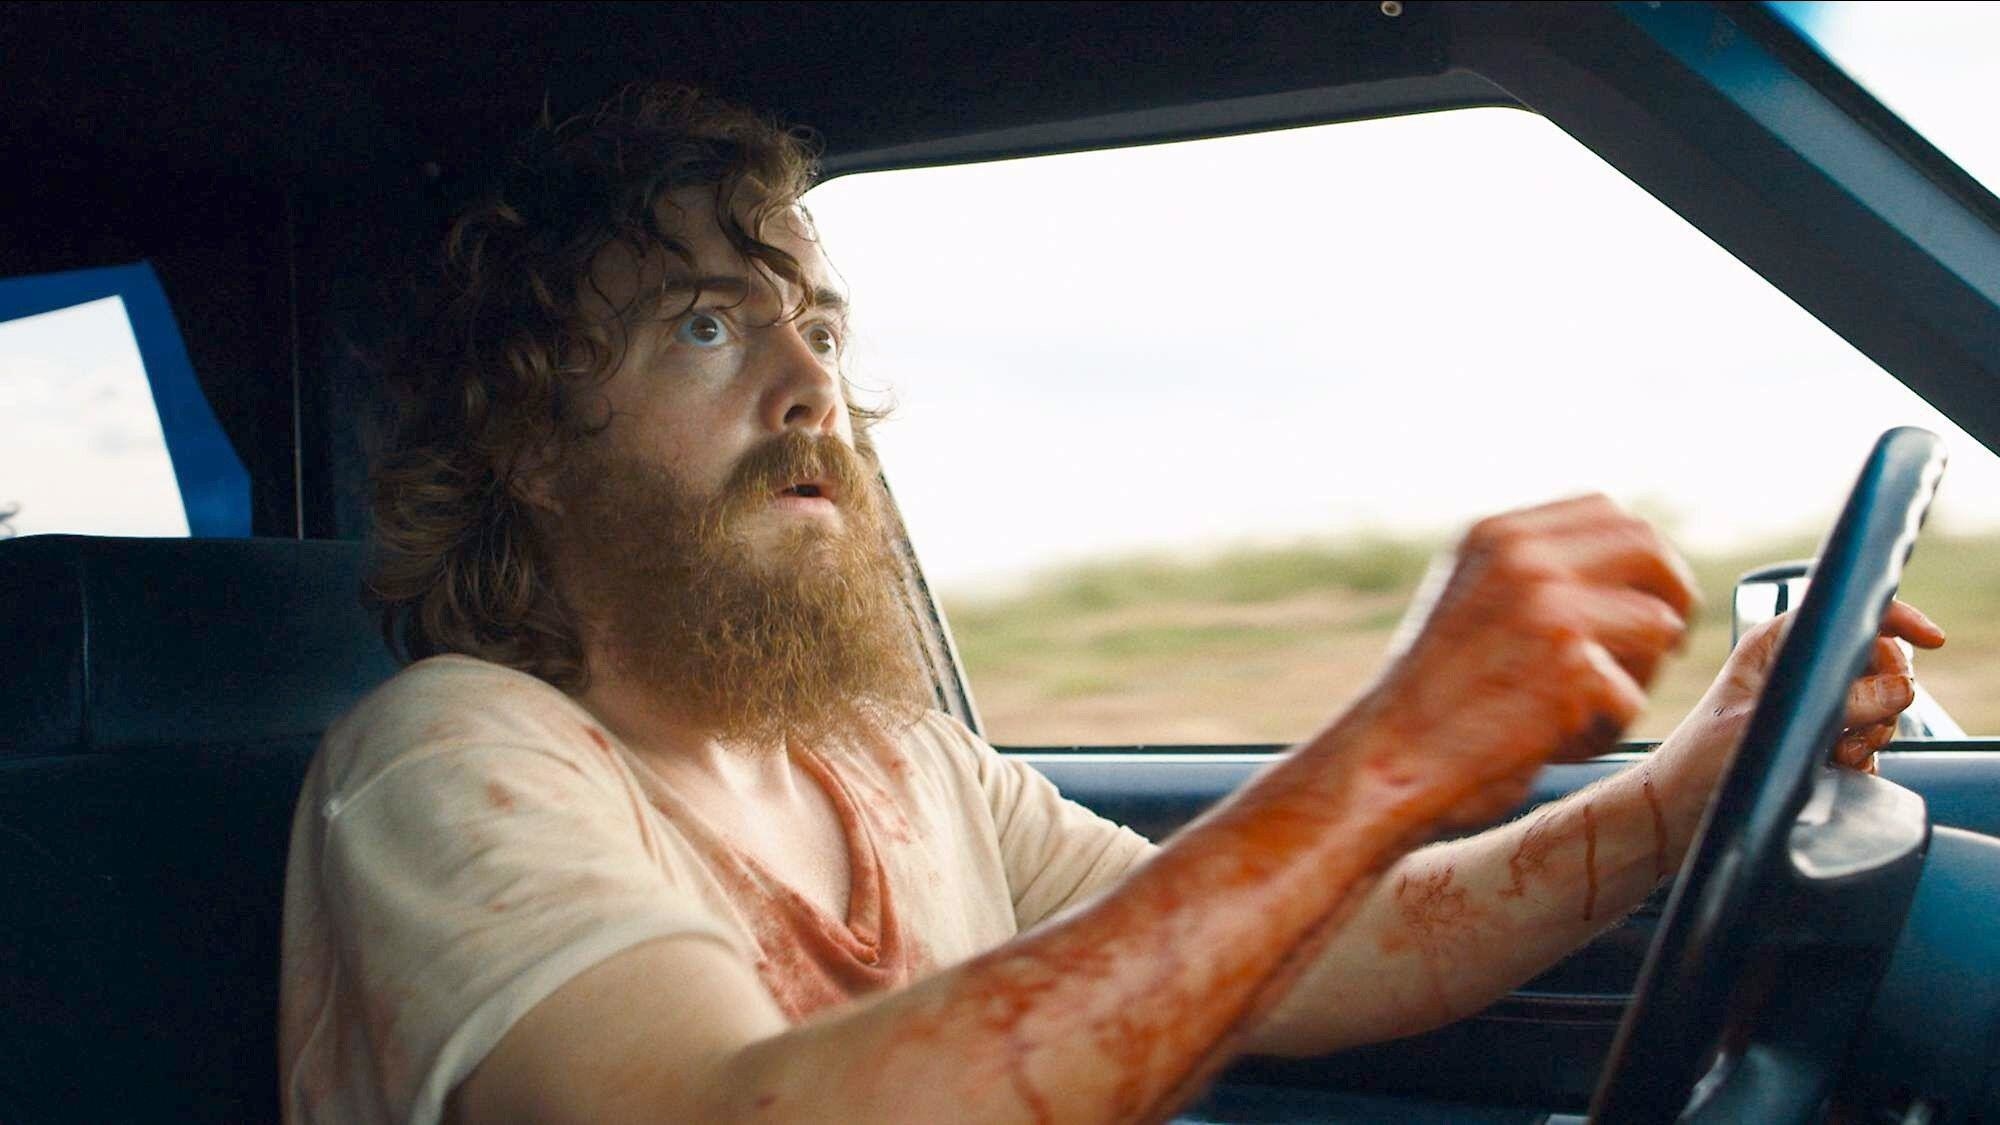 A bearded man covered in blood stares worriedly into his rearview mirror